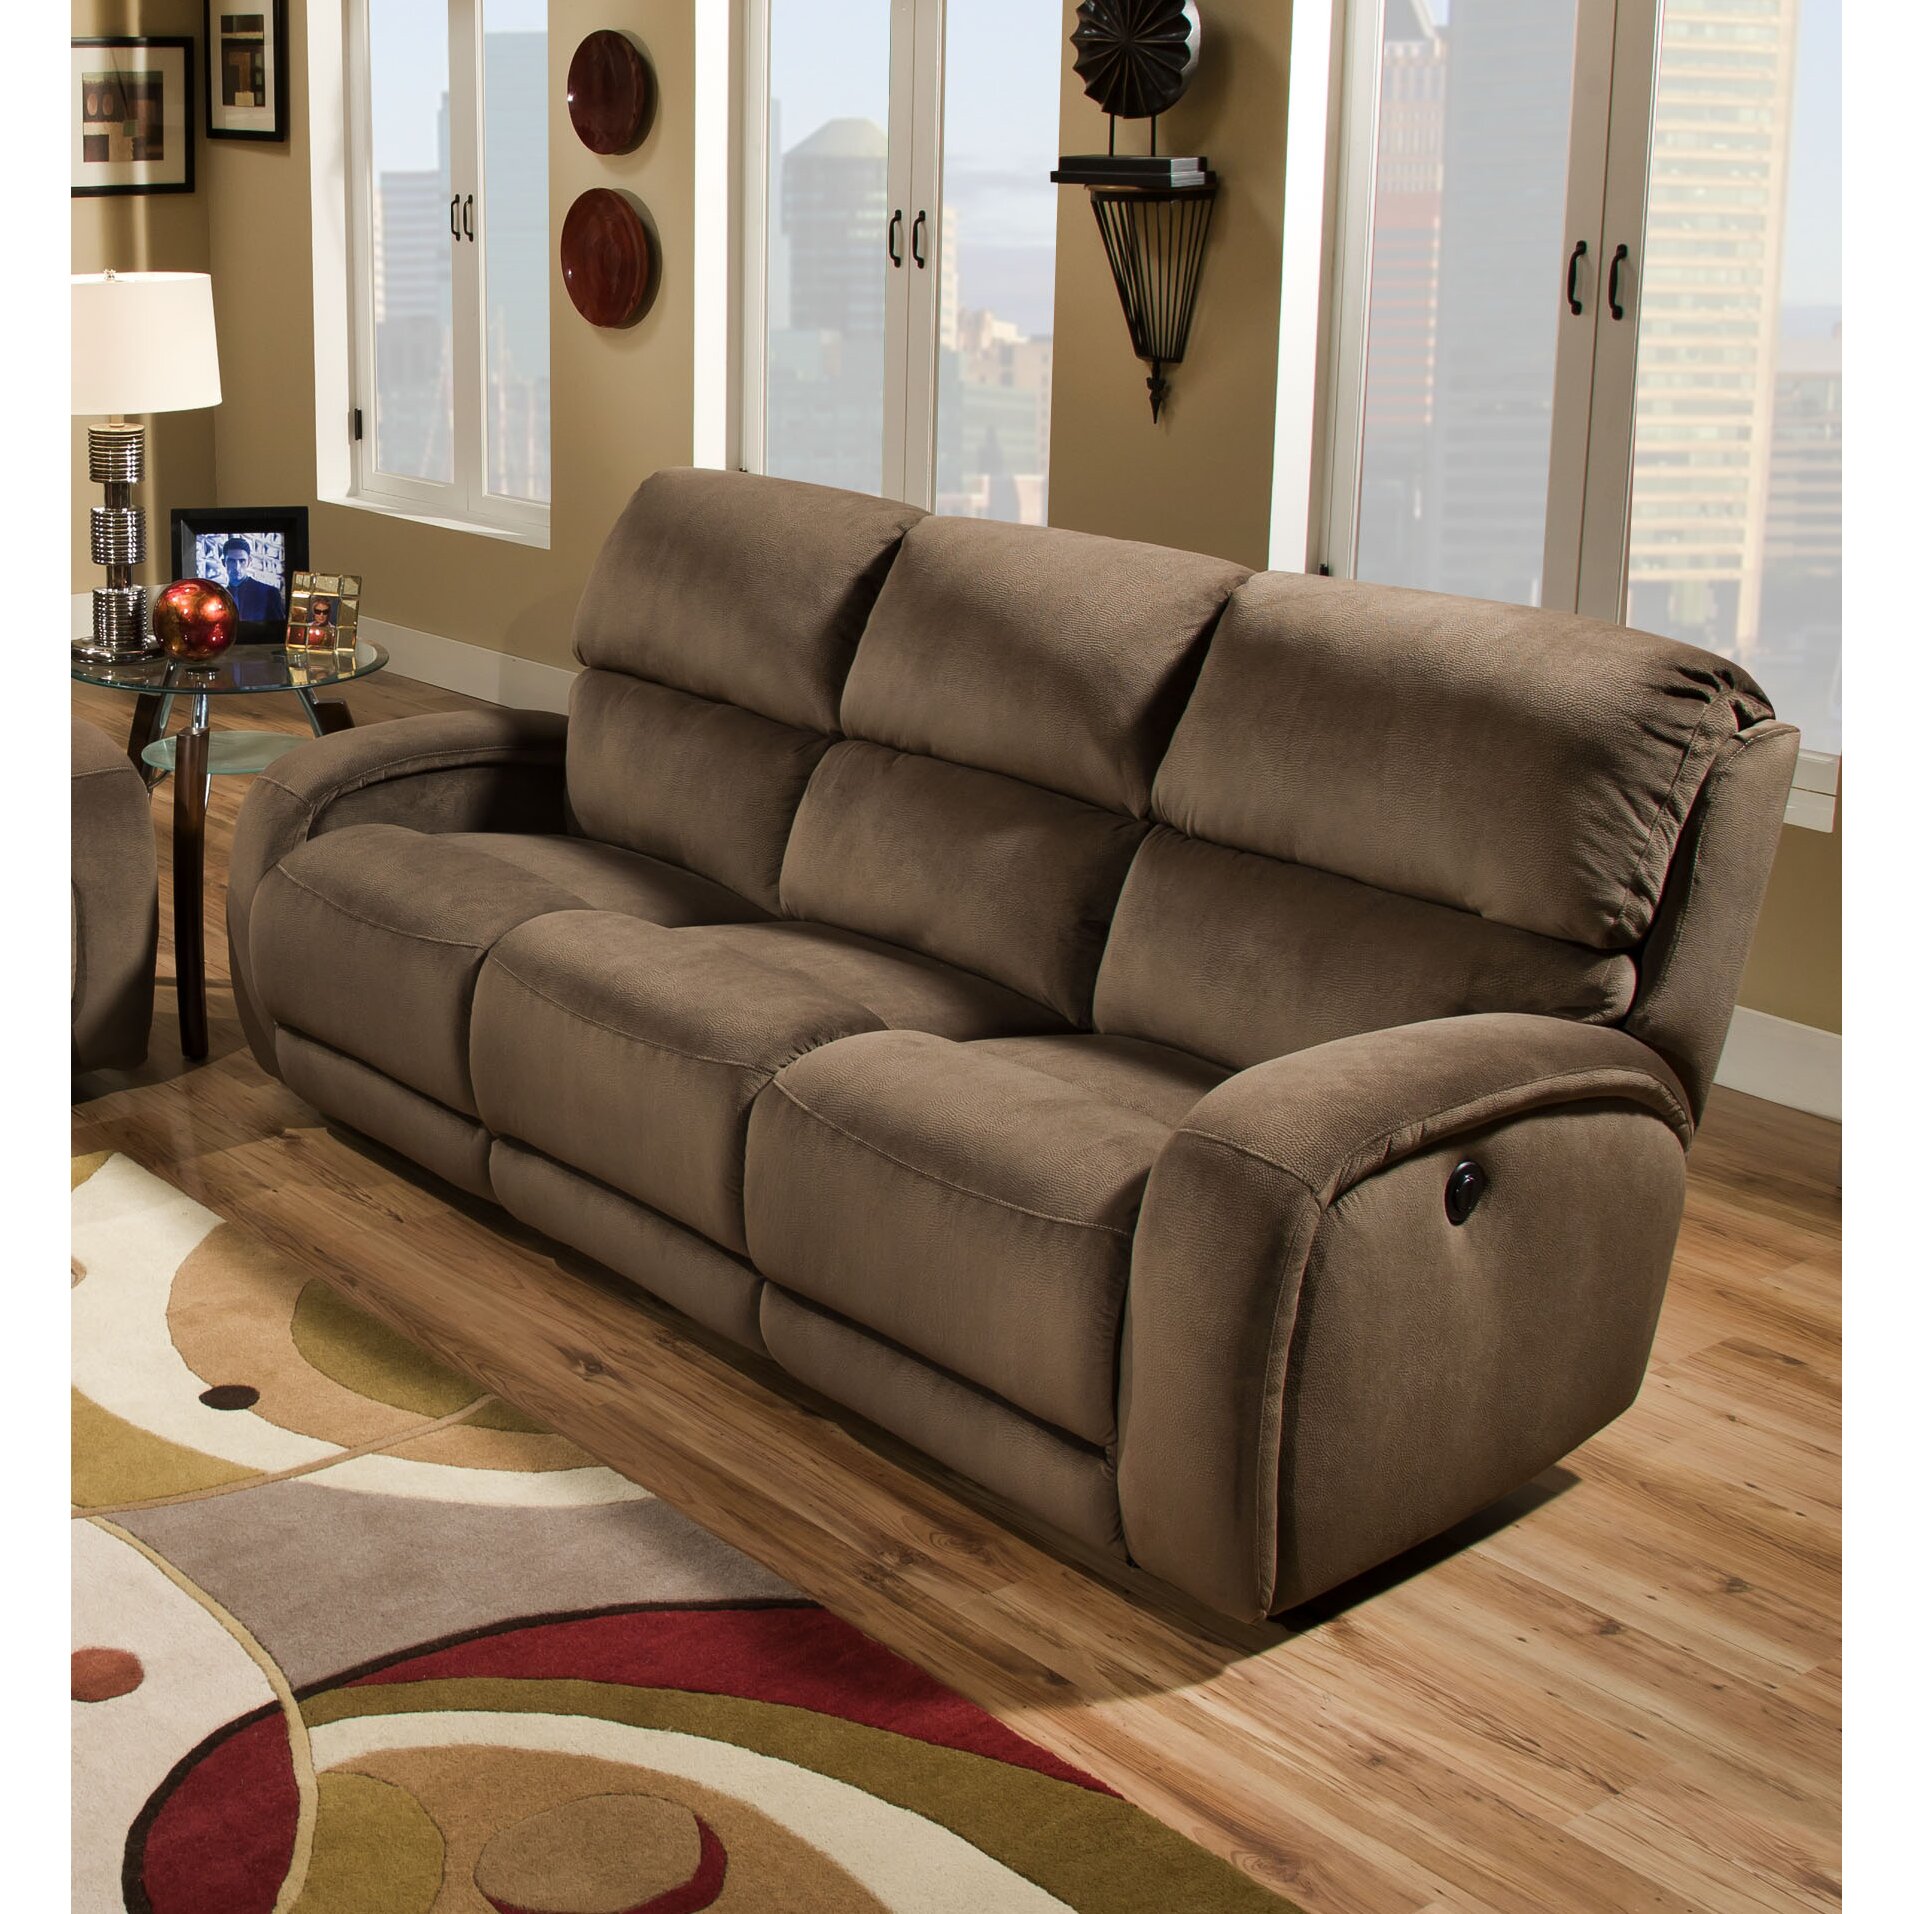 Southern motion recliners Sydney